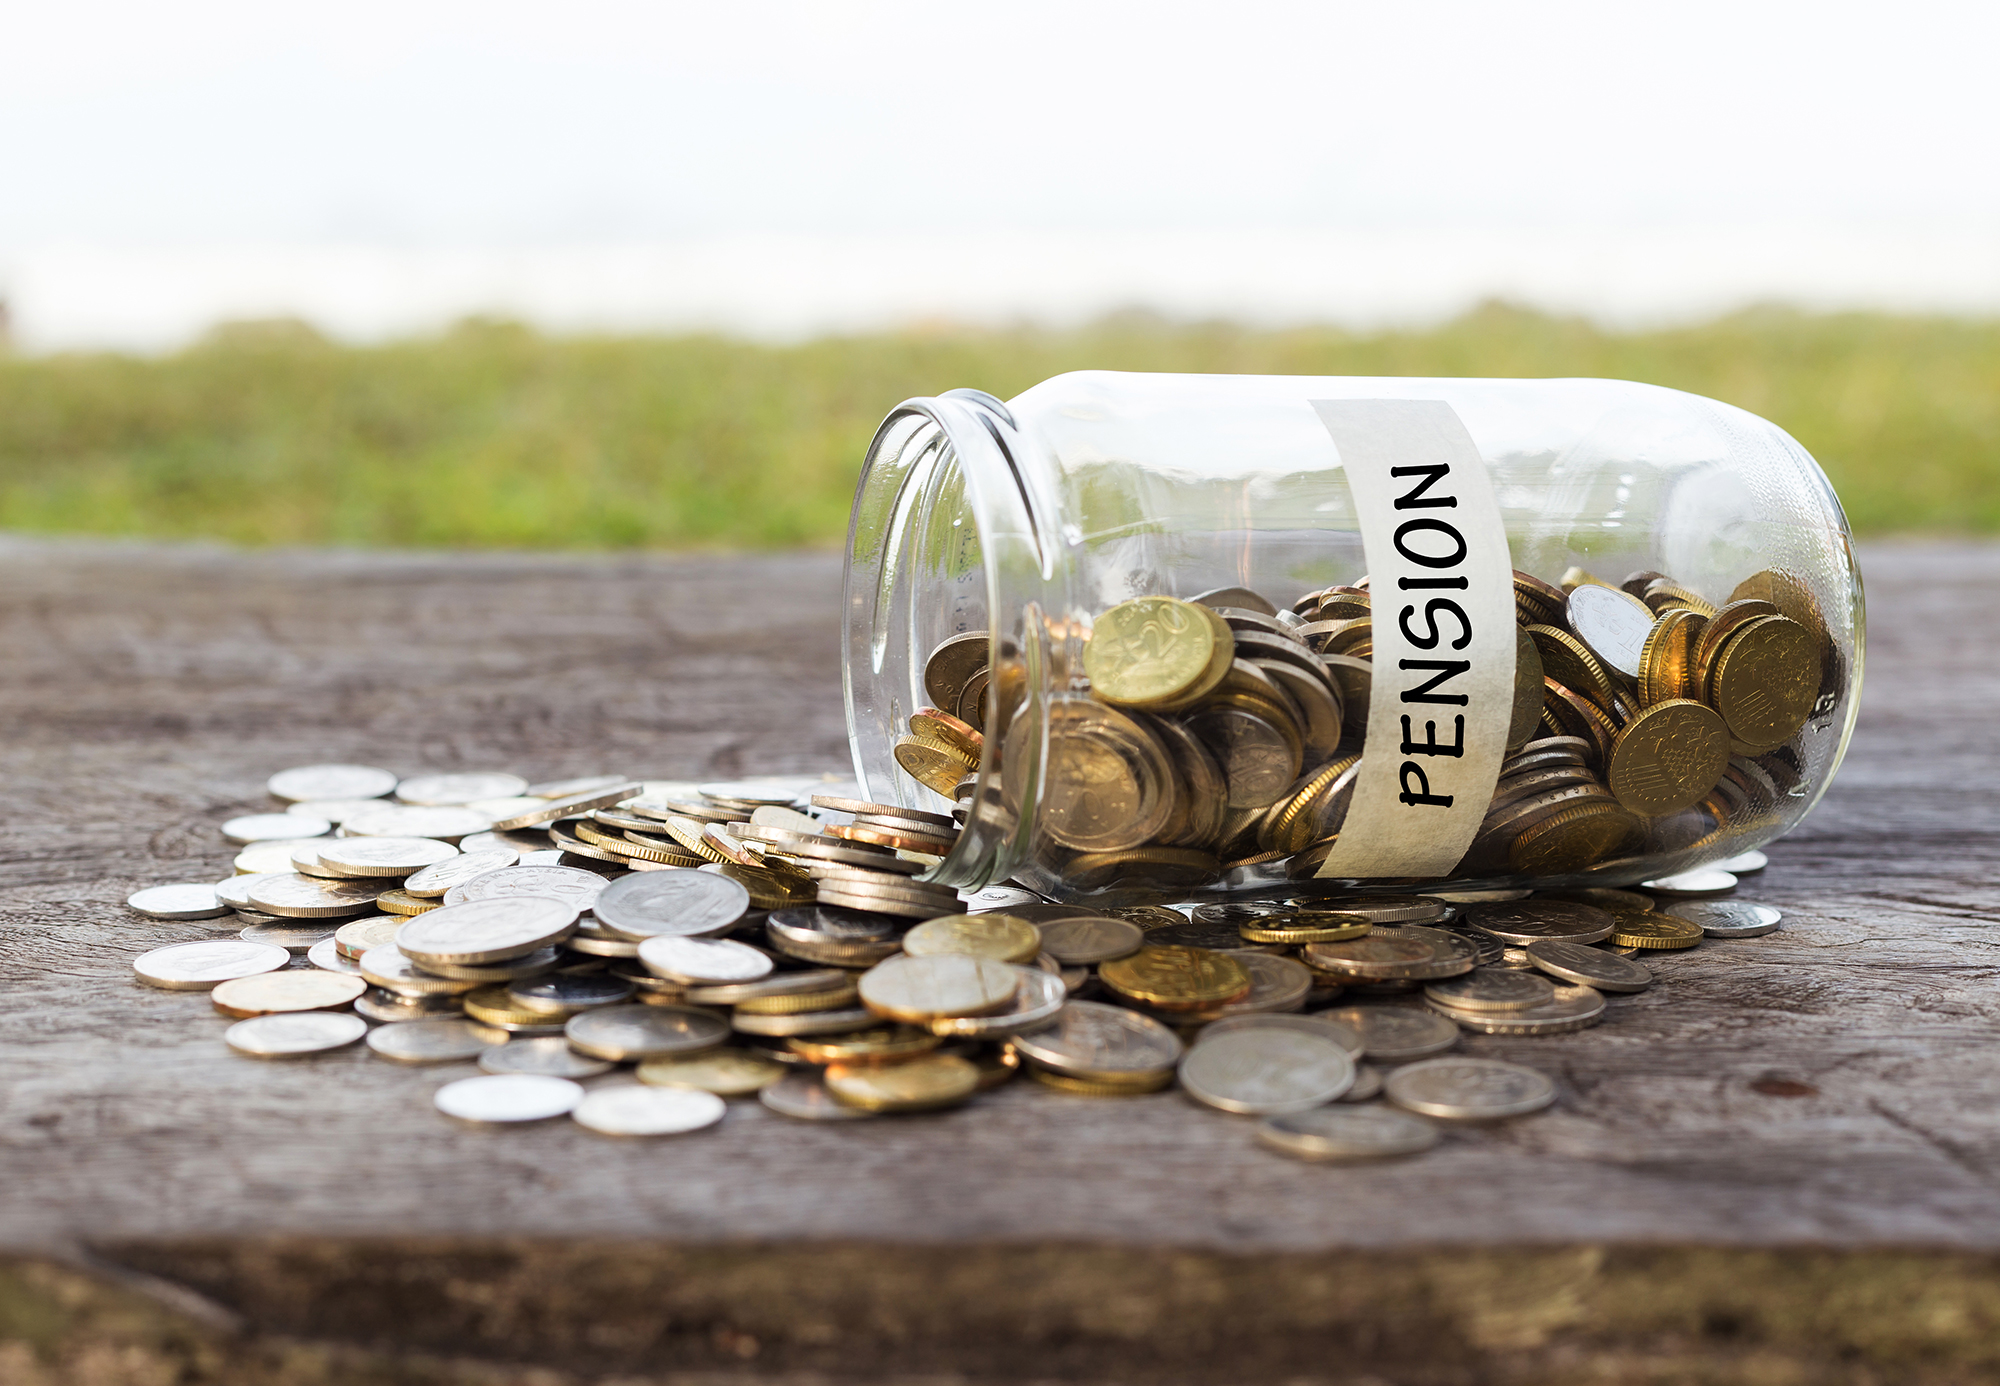 A pension pot knocked over. (Image: Shutterstock)